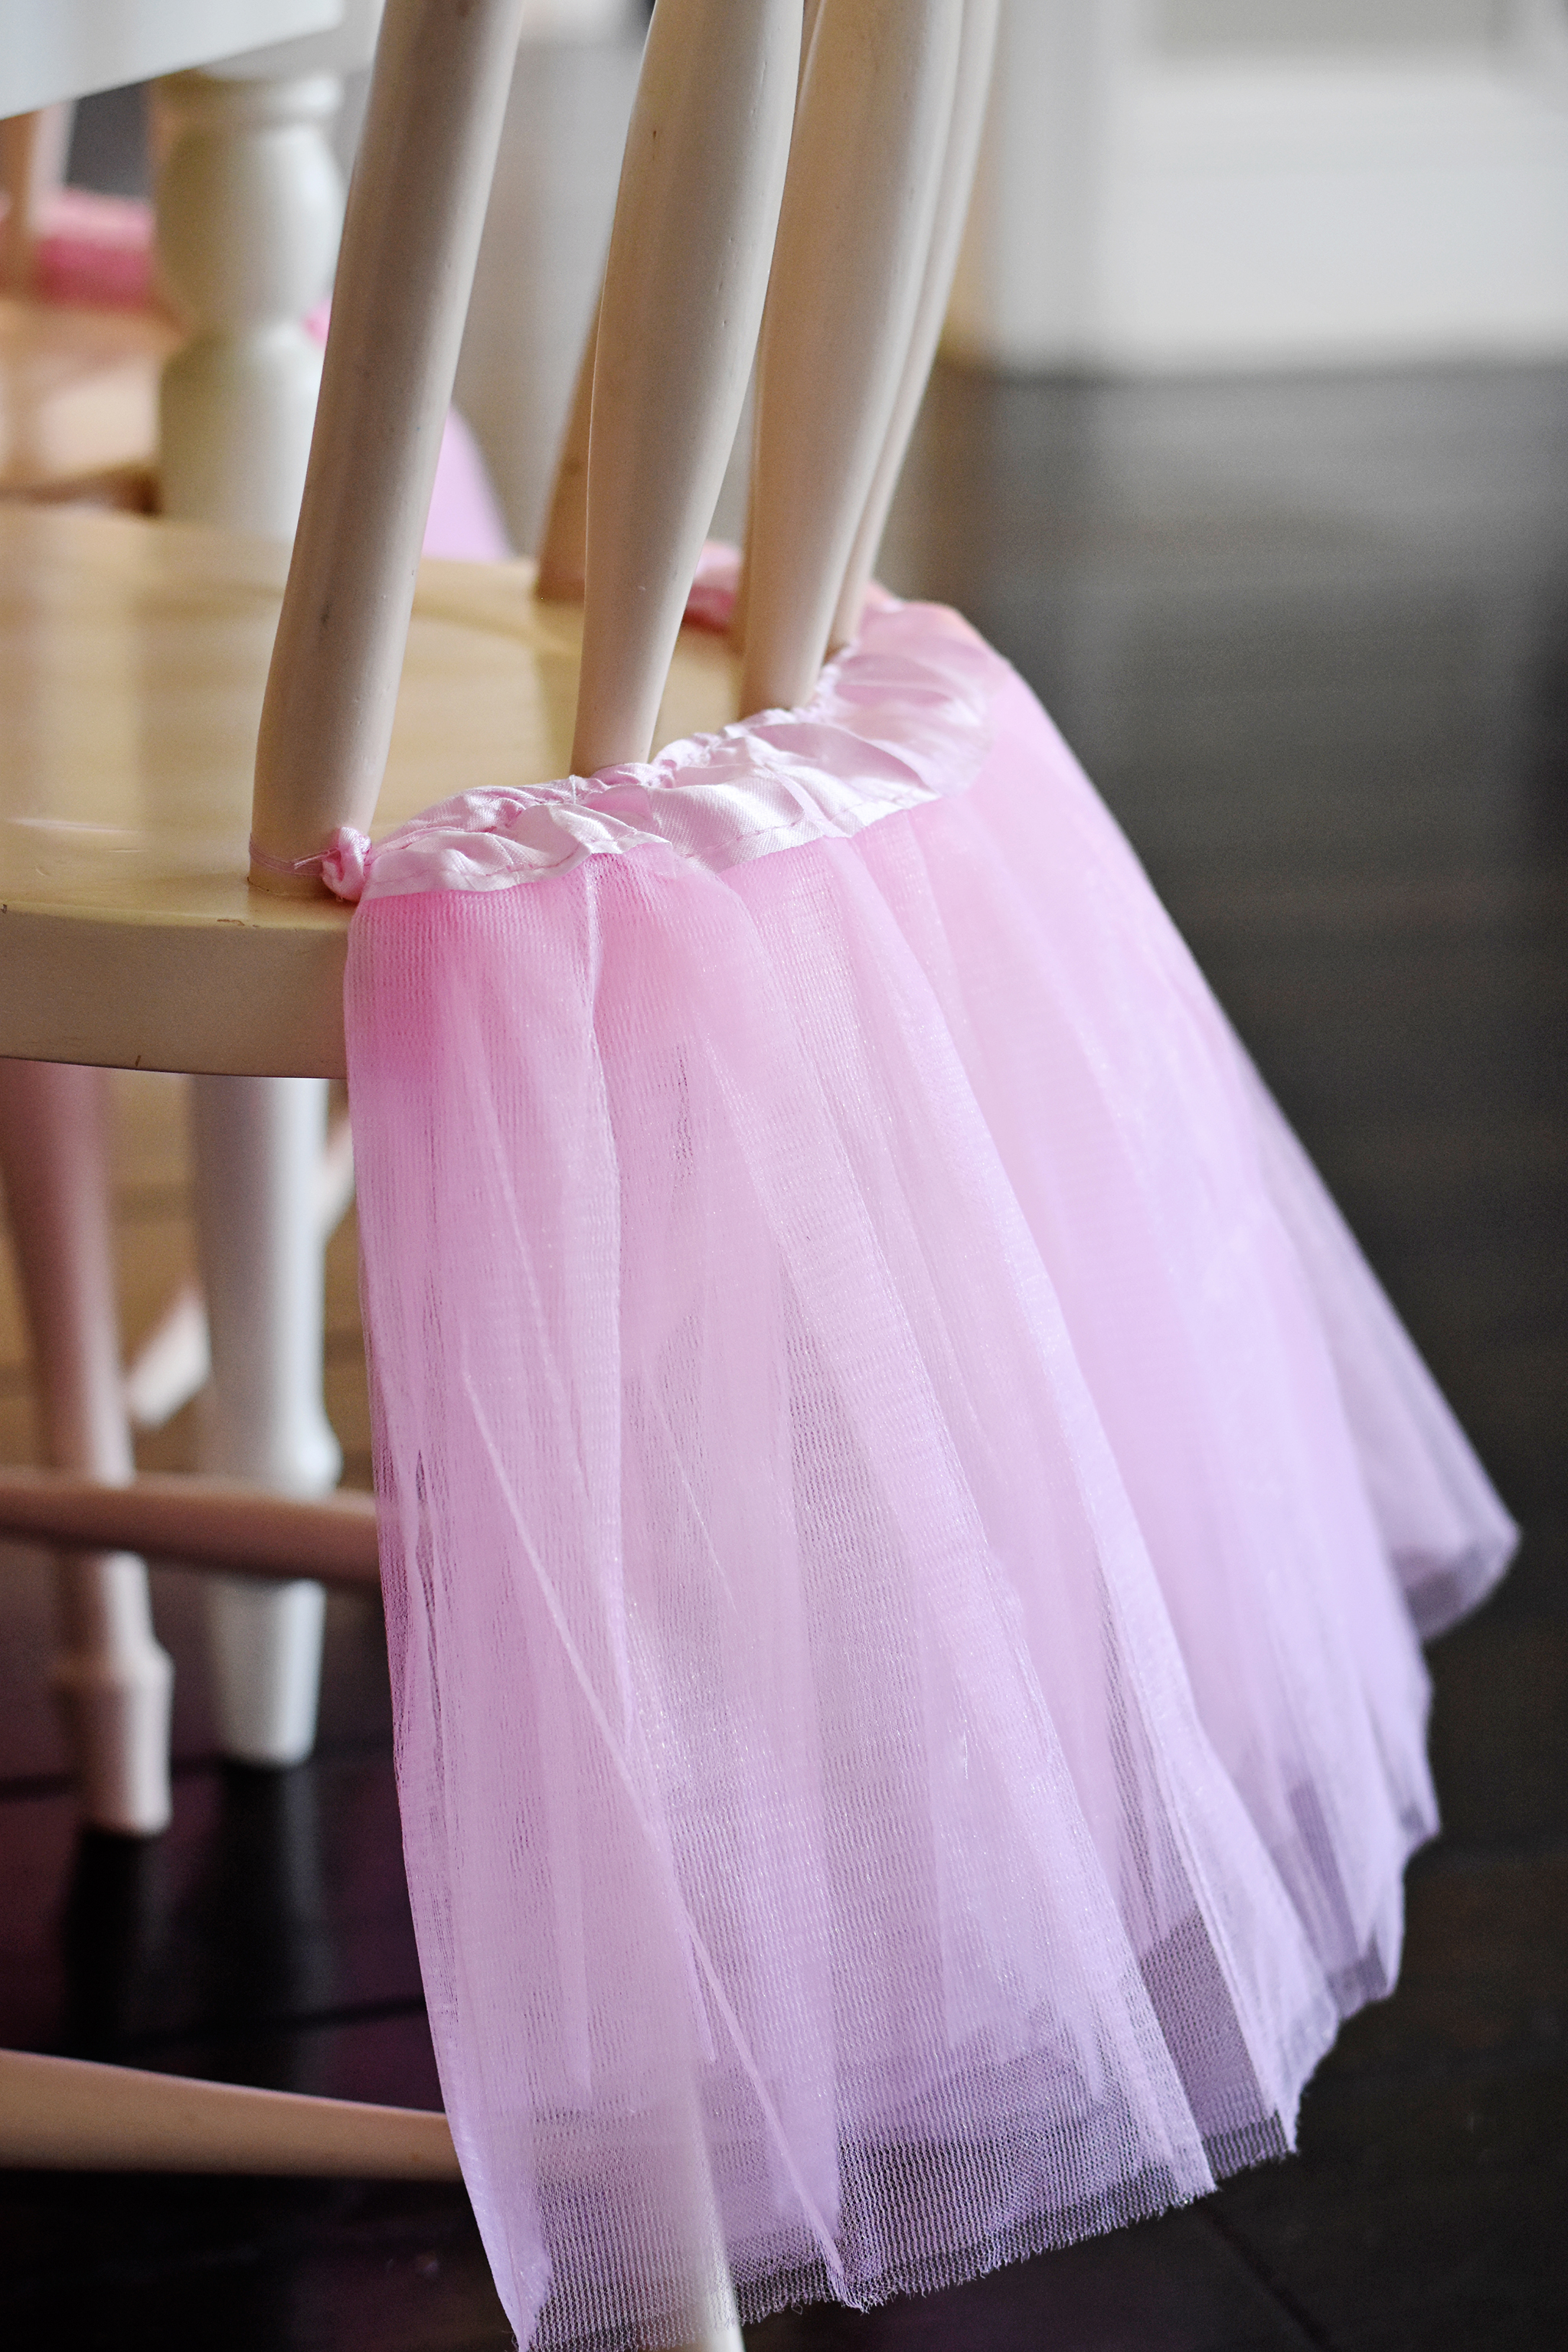 Dress up plain chairs with inexpensive pink tutu skirts!